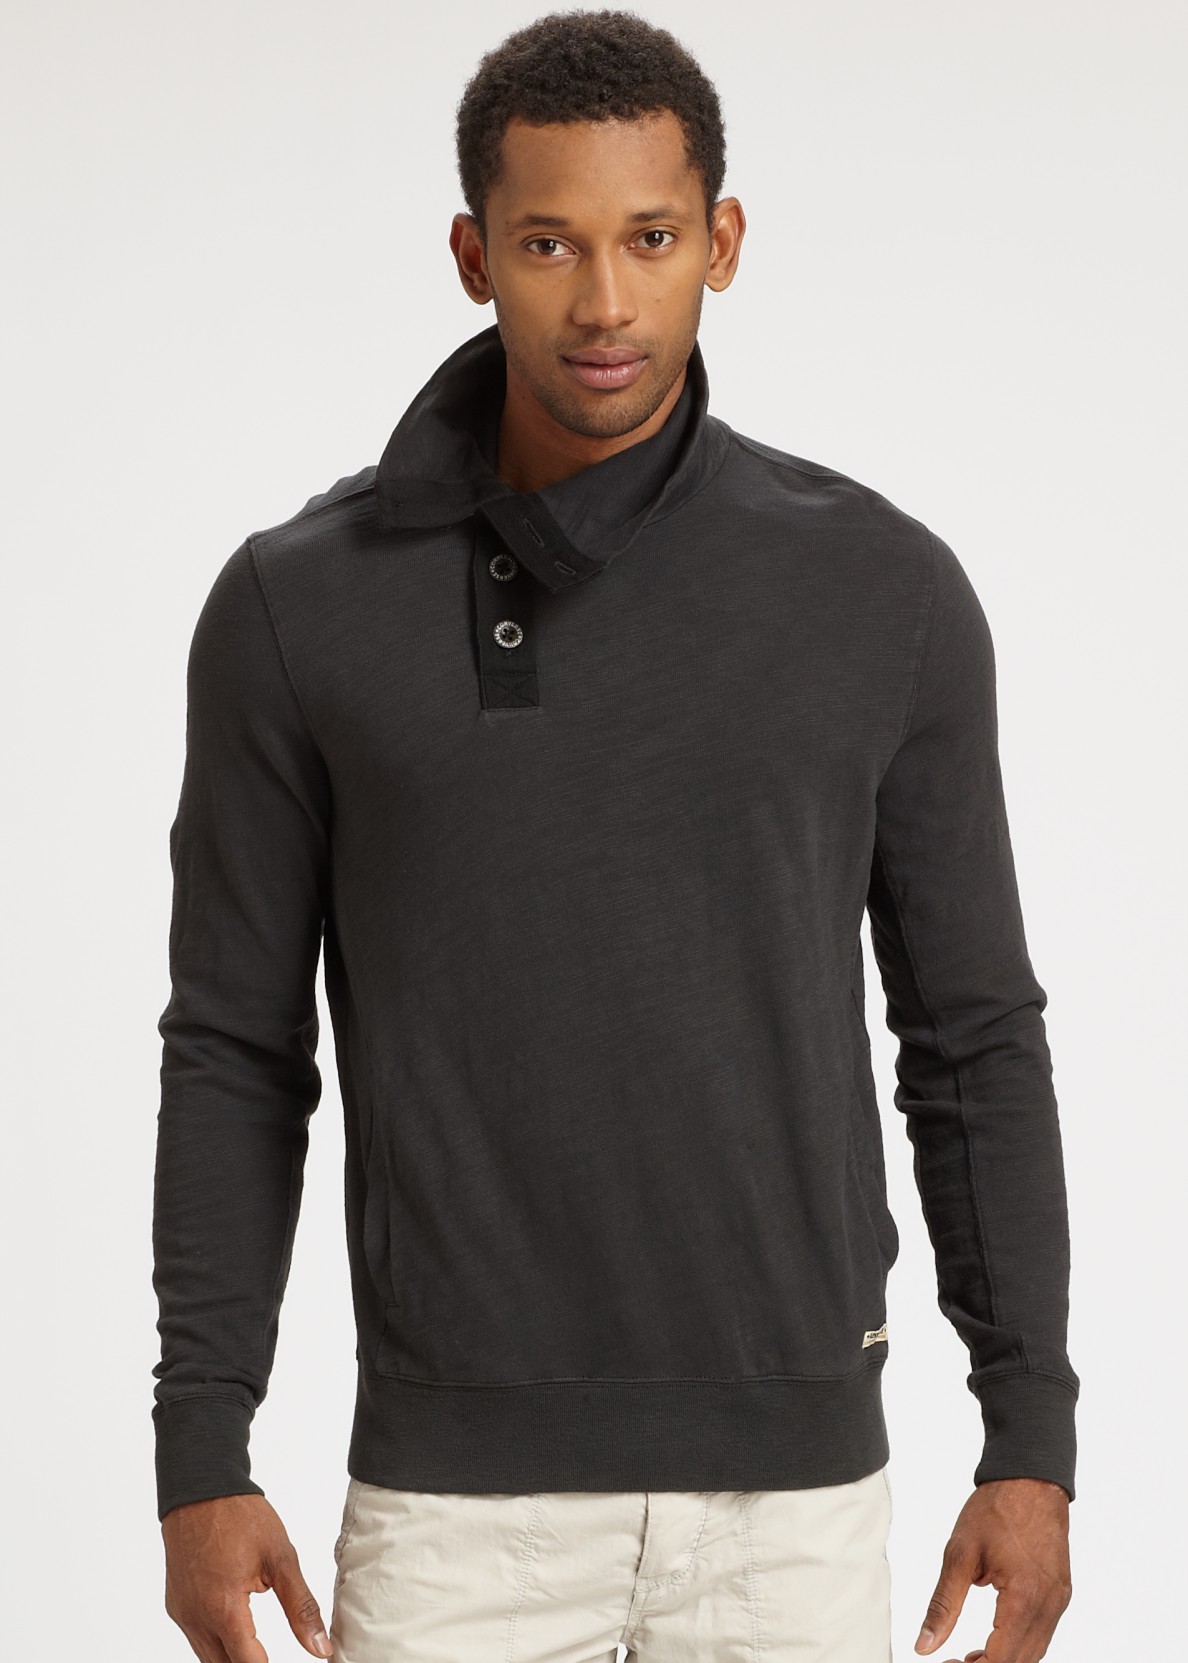 Lyst - Converse Funnel Neck Sweater in Black for Men